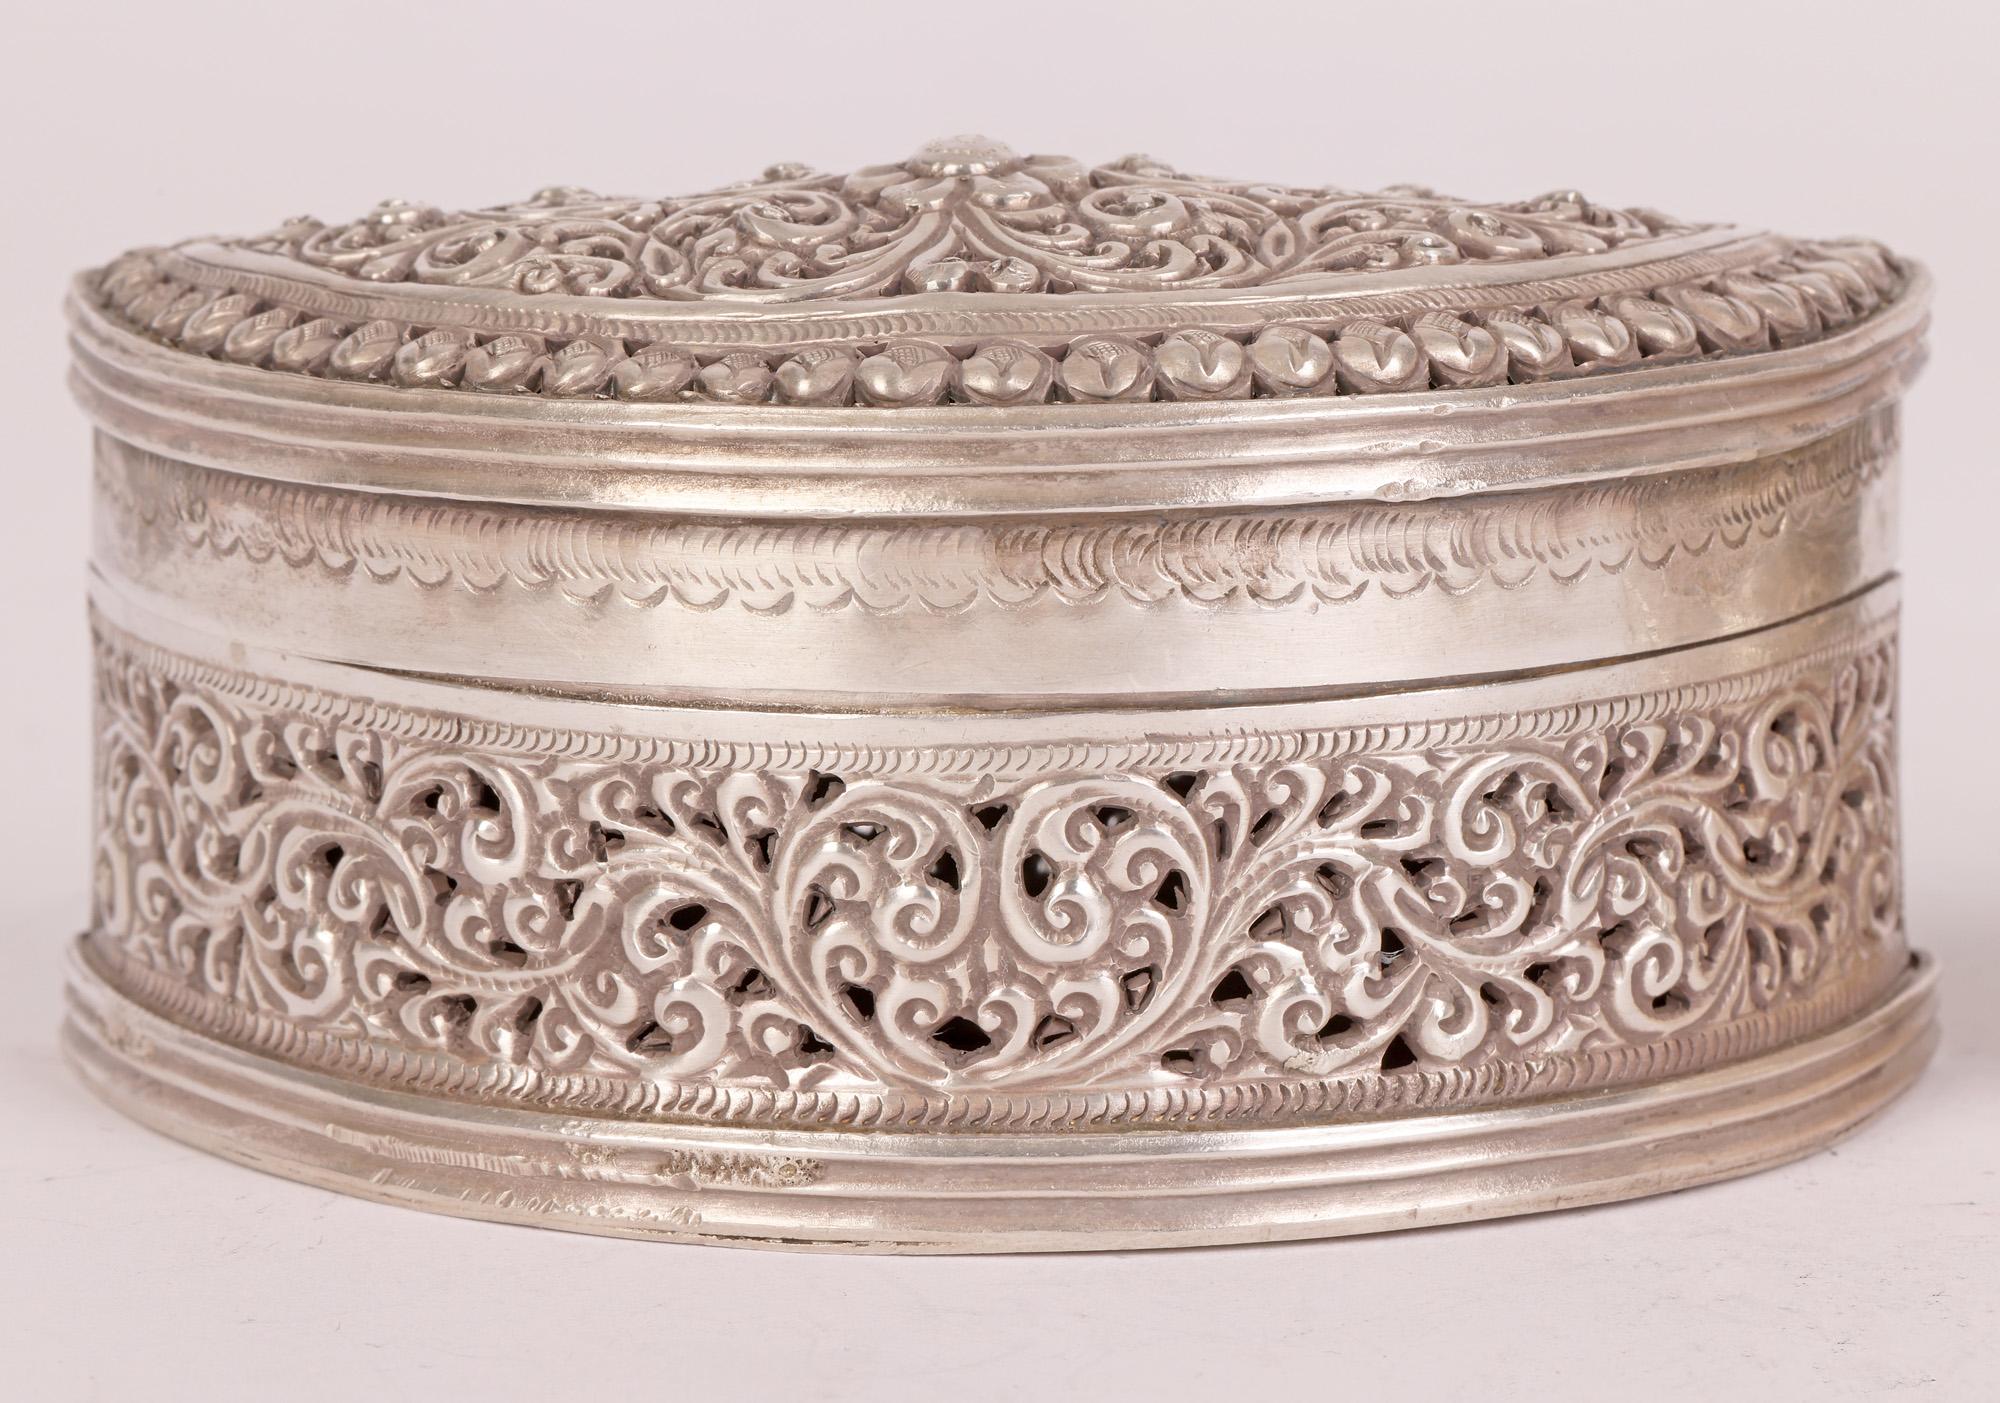 Hand-Crafted Burmese Silver Half Moon Betel Boxes